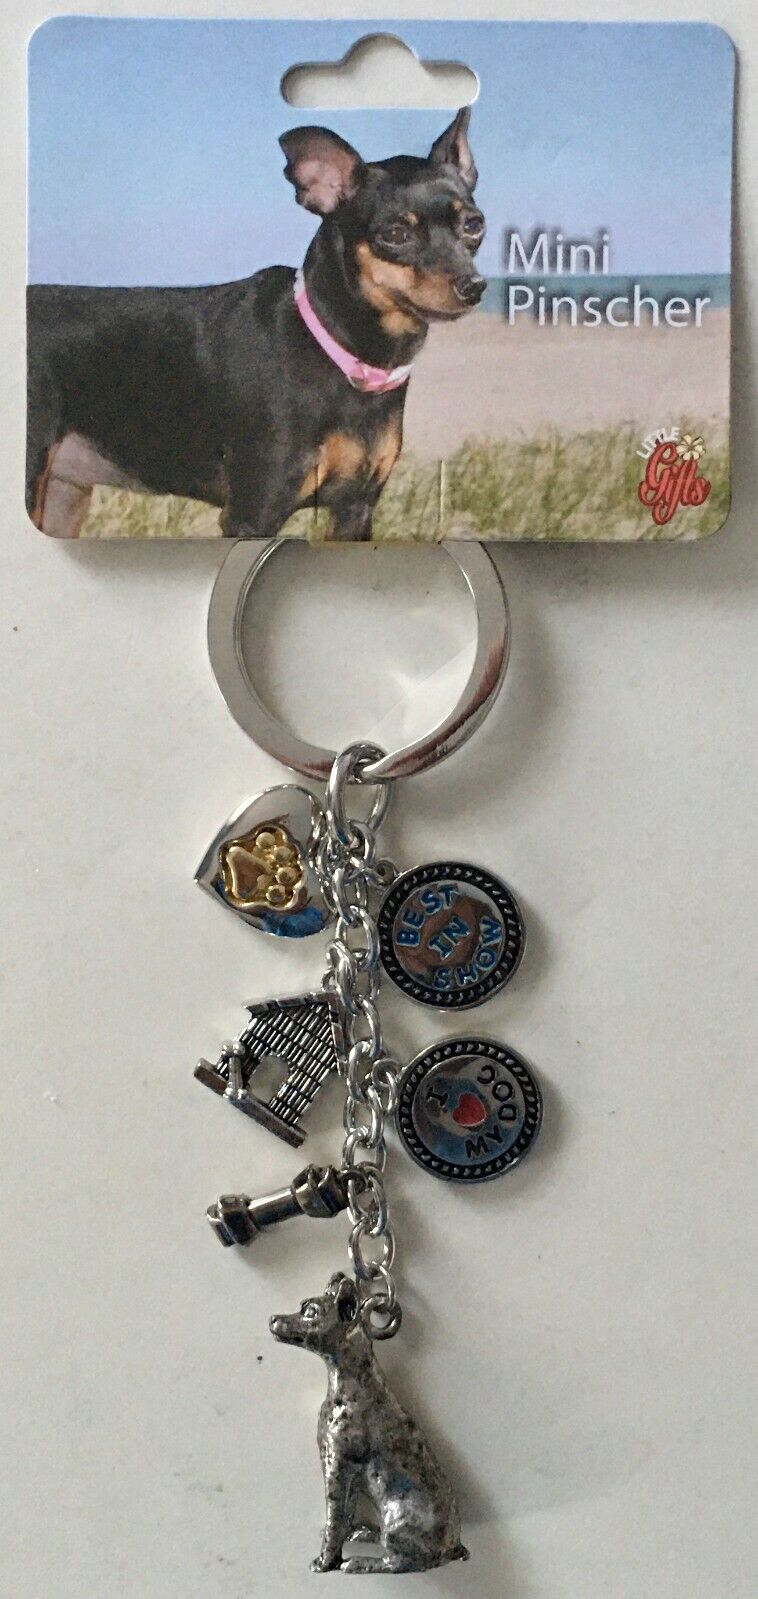 Little Gifts Mini Pinscher I Love My Dog / Best In Show Keychain with Charms NEW